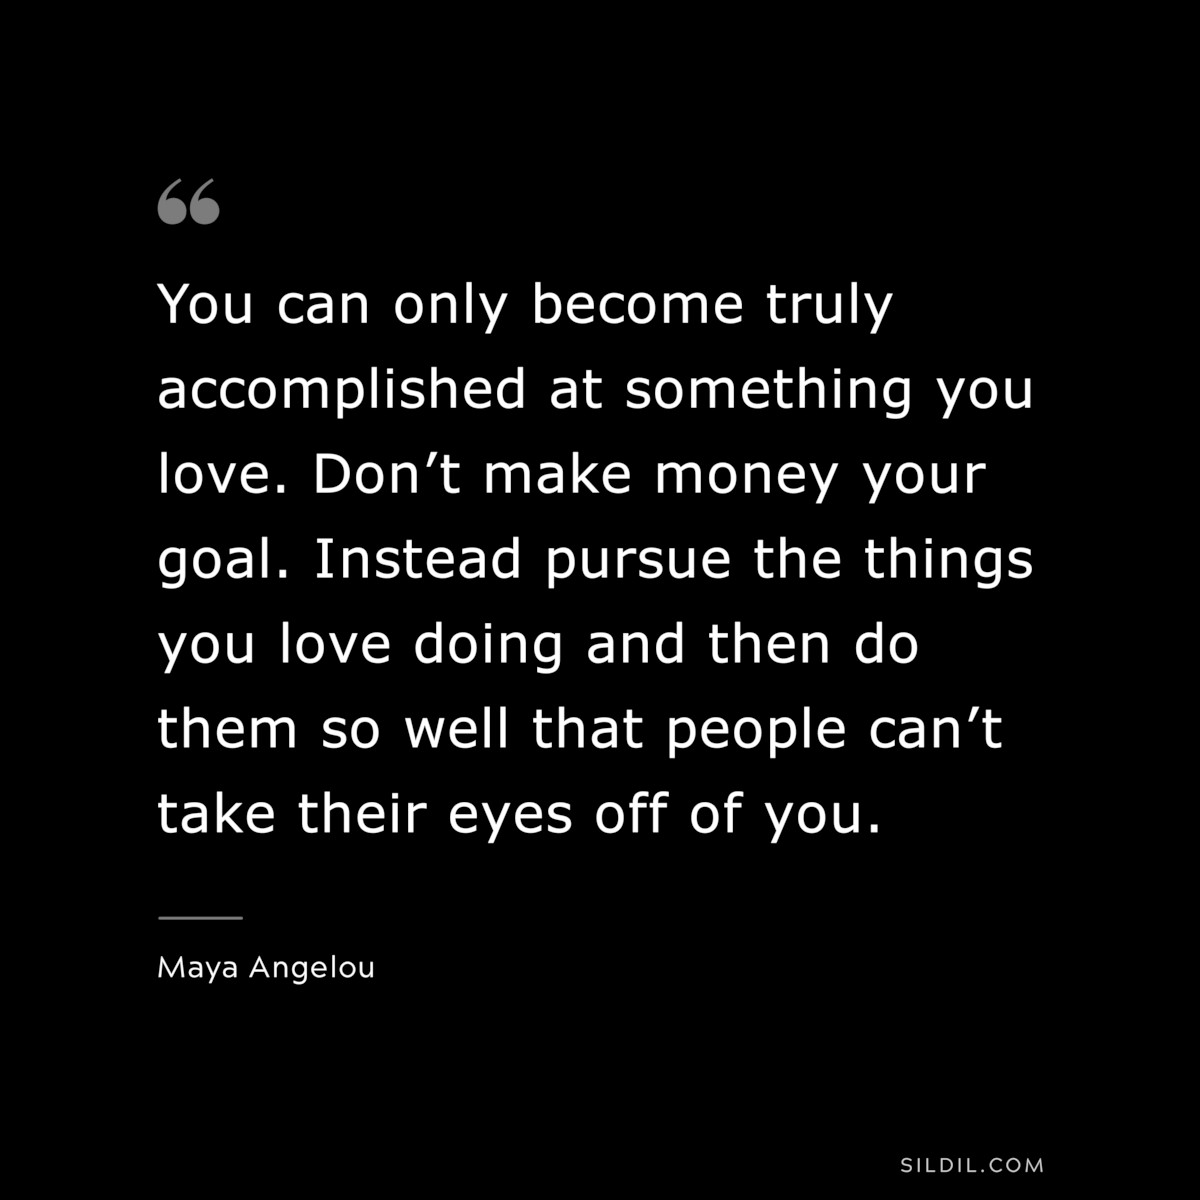 You can only become truly accomplished at something you love. Don’t make money your goal. Instead pursue the things you love doing and then do them so well that people can’t take their eyes off of you. ― Maya Angelou